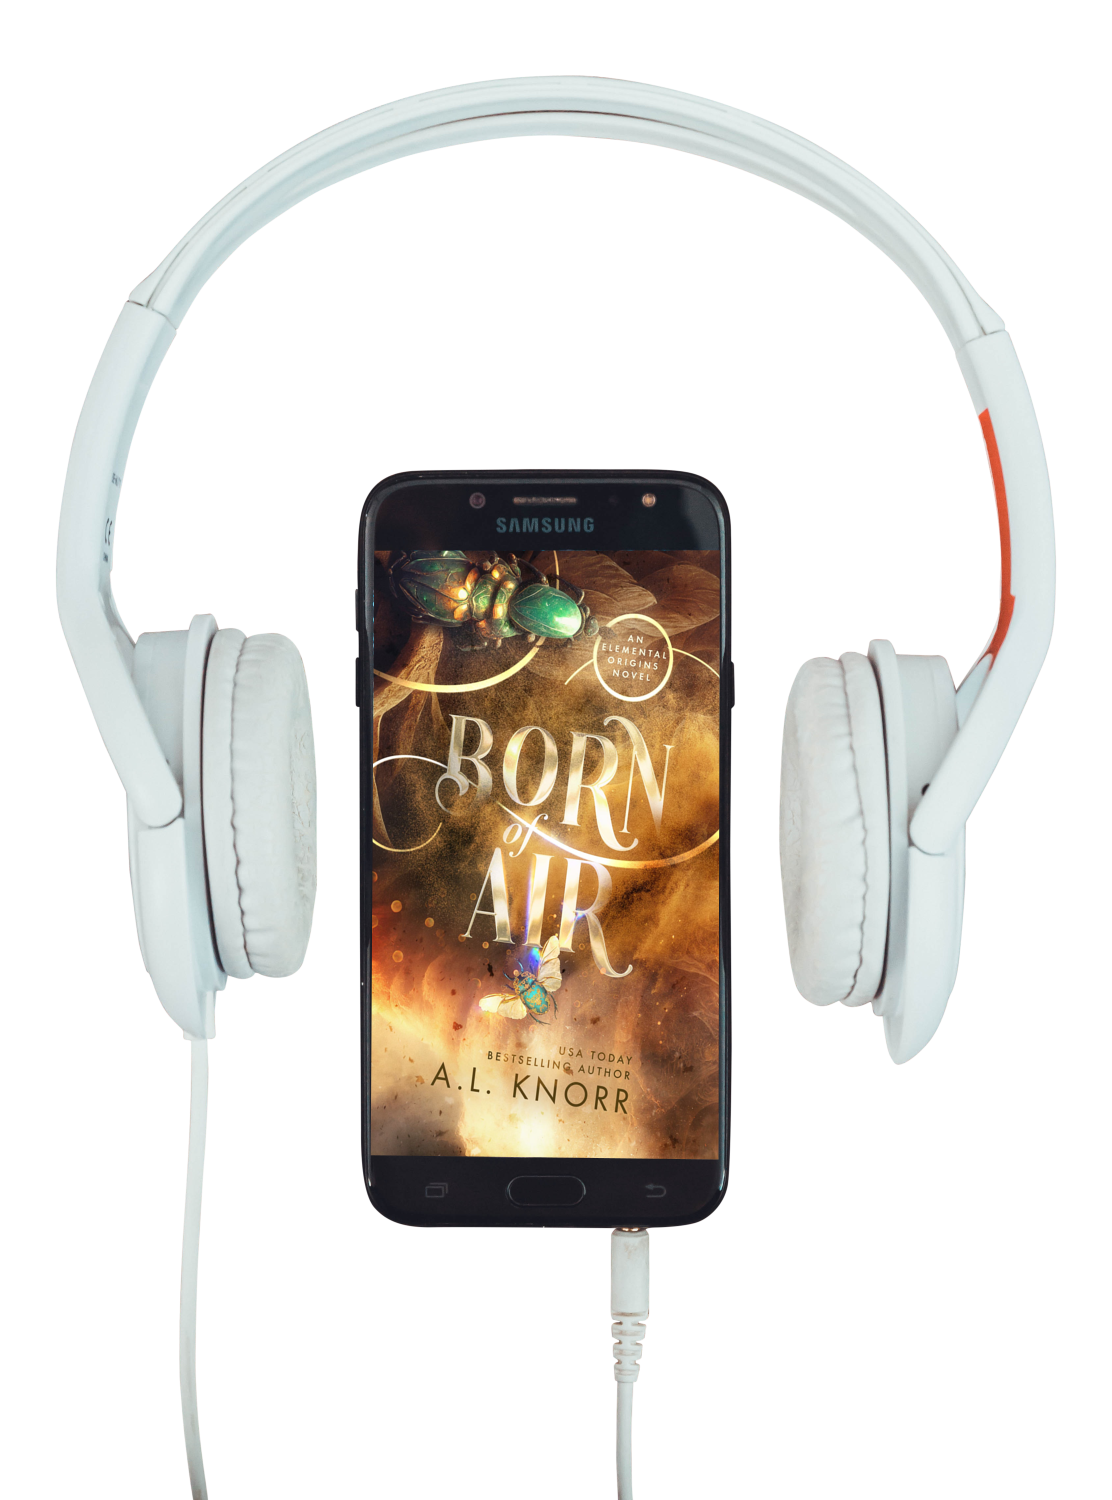 Born of Air audiobook with headphones